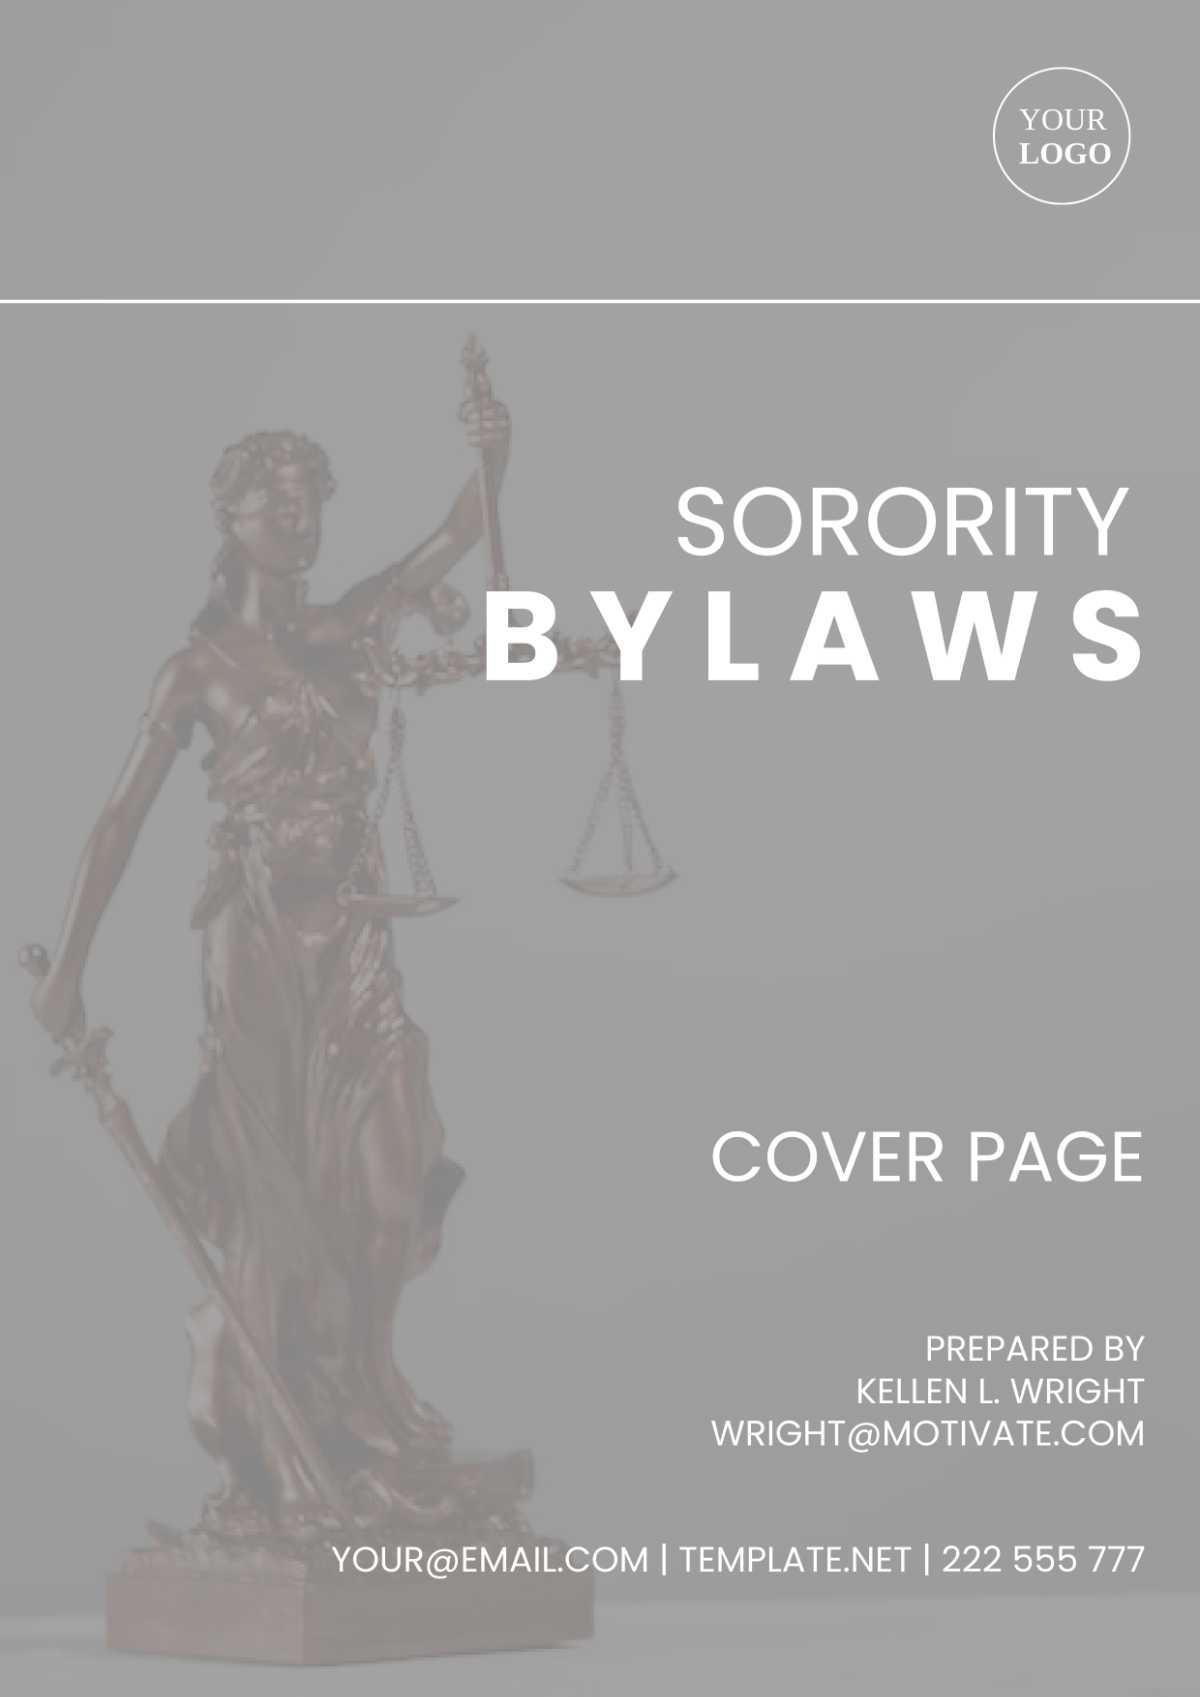 Sorority Bylaws Cover Page Template